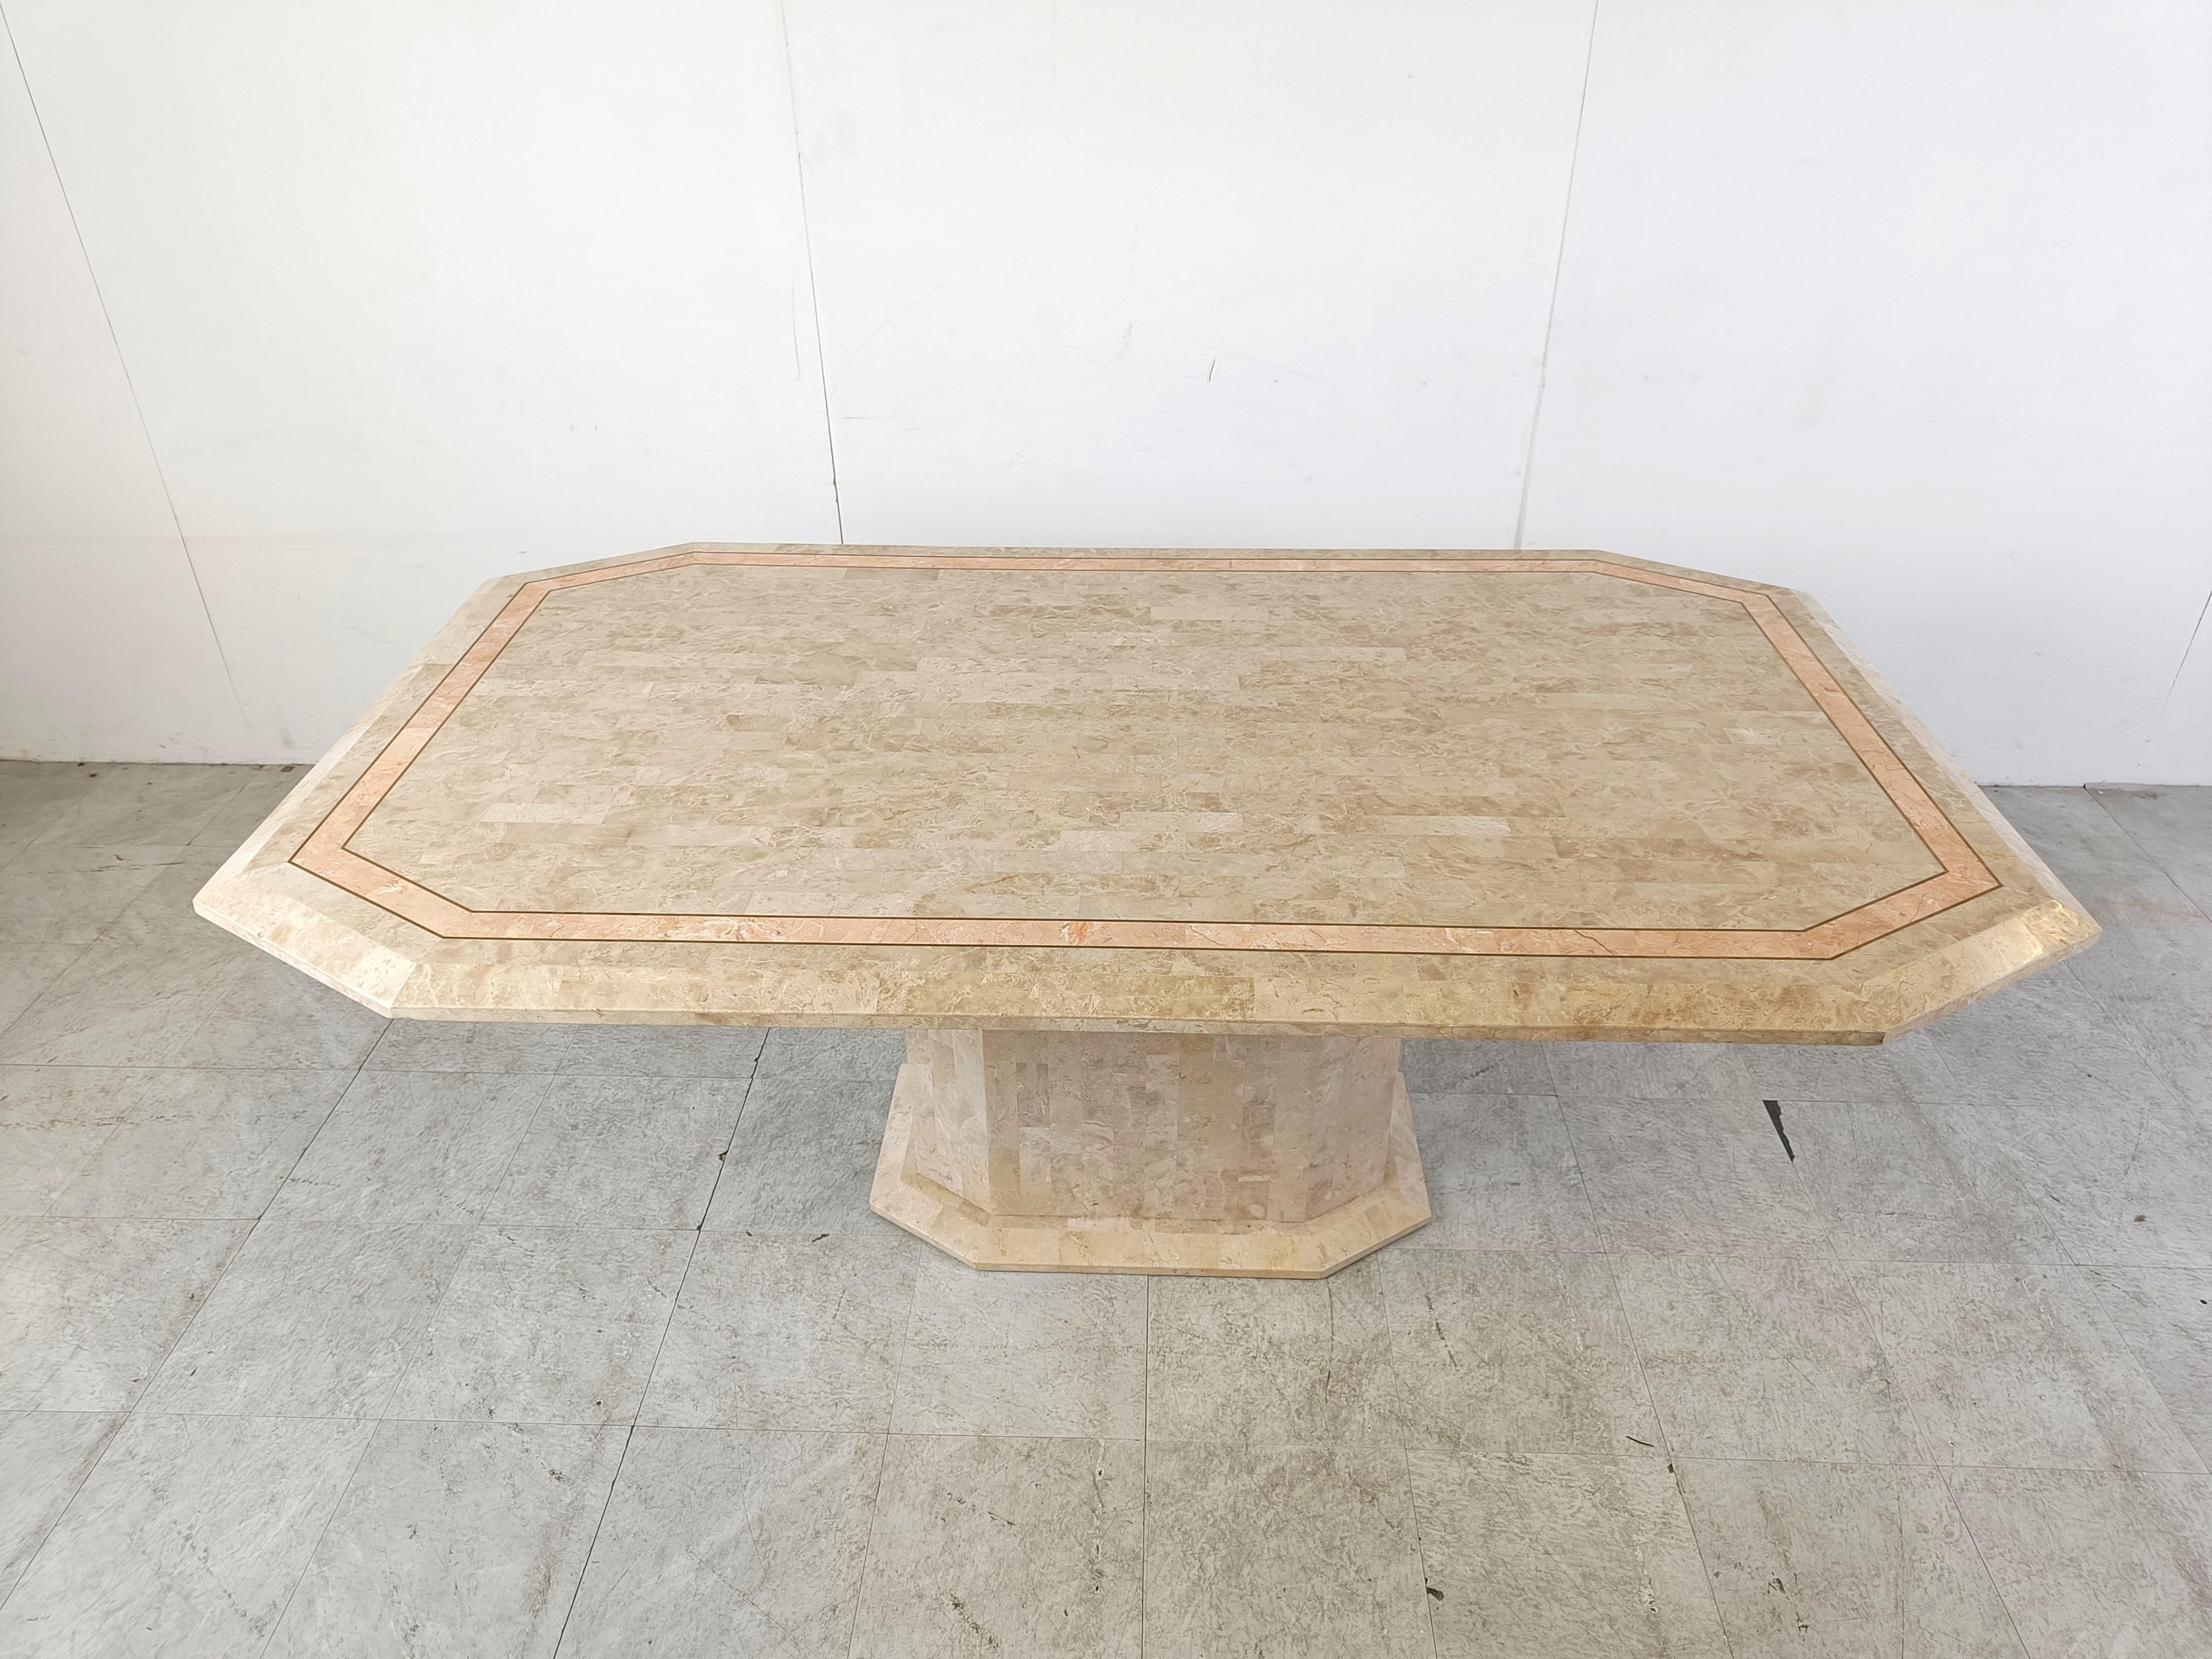 Gorgeous dining table made from tessellated stone.

The dining table has a very elegant table top with a central pedestal base.

Inlaid brass and contrasting inlaid red stone.

Good size to accommodate 6-8 persons.

Very good